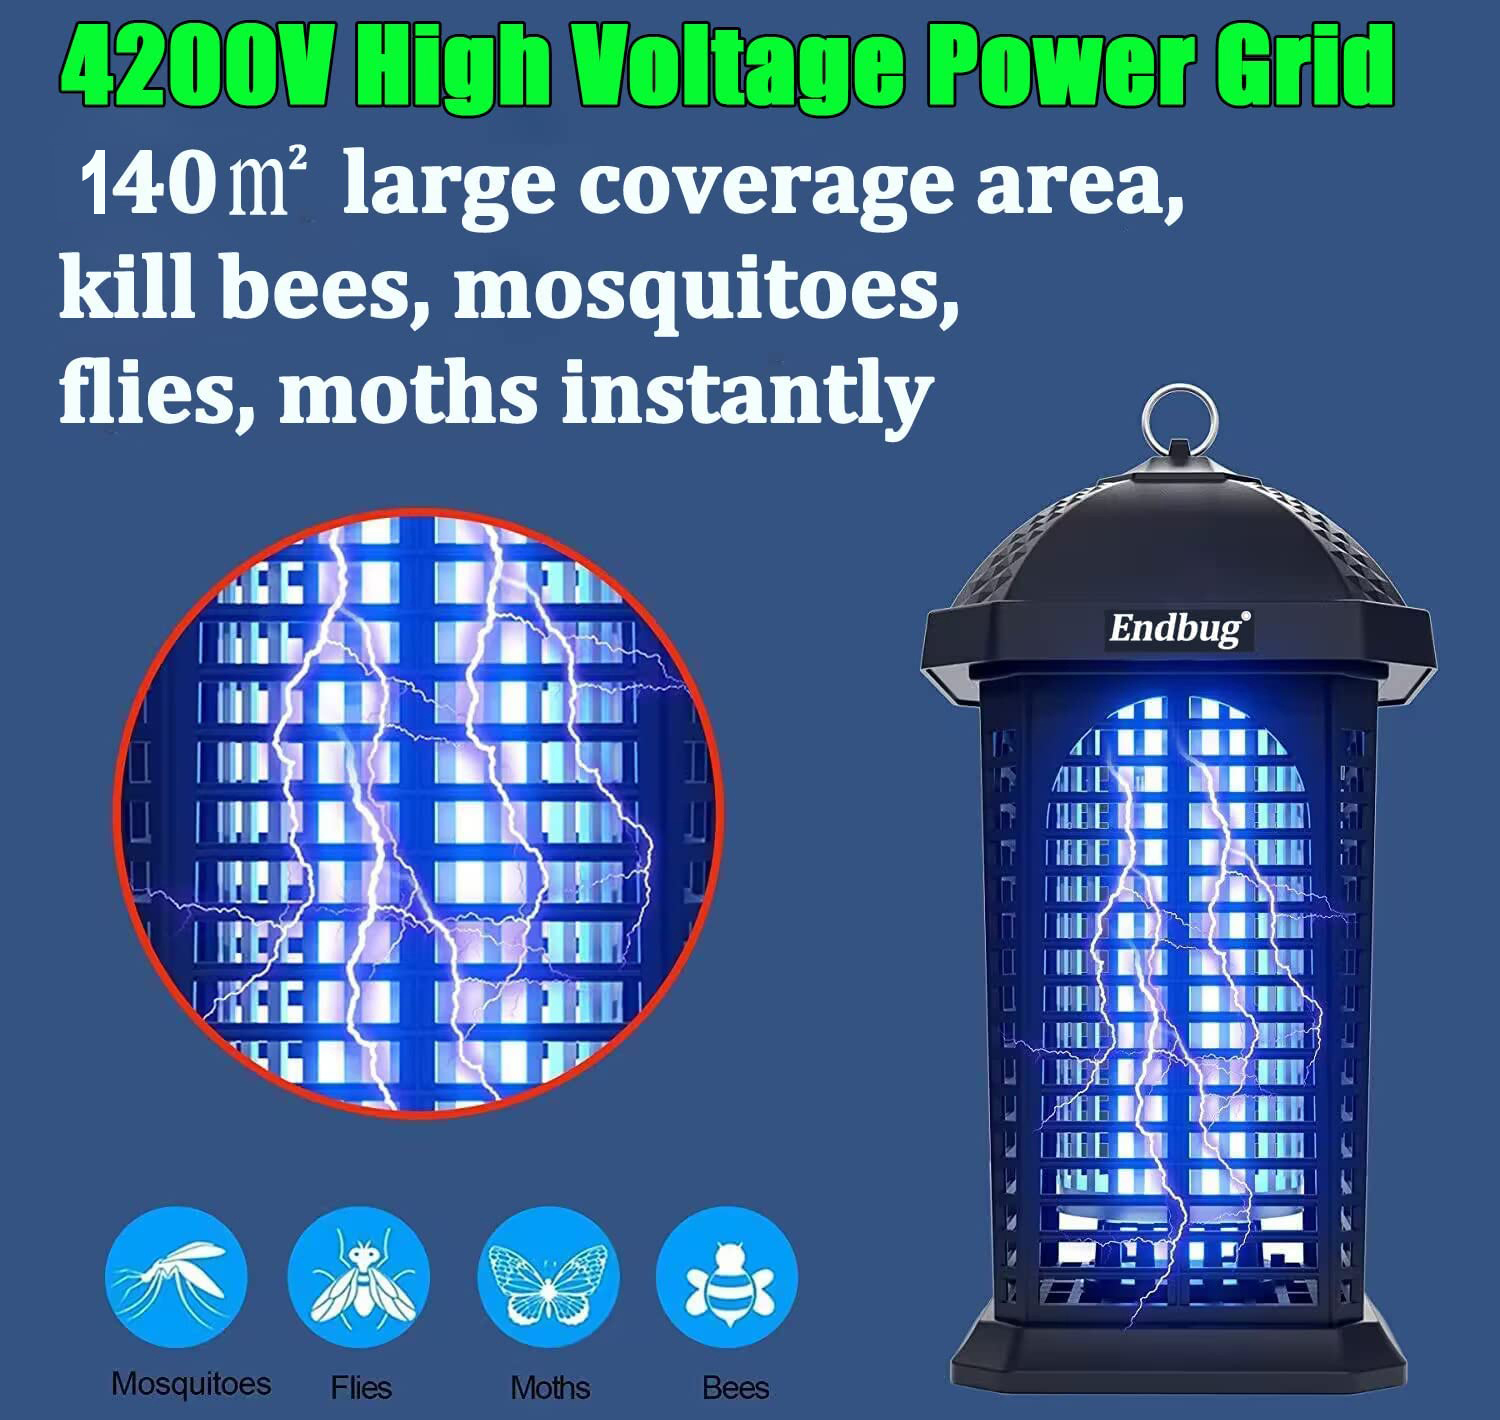 LED-Desk-Lights-Electric-Insect-Killer-Bug-Zappers-Powerful-4200V-25W-Waterproof-Mosquito-Zappers-Lamp-with-UV-Light-Protective-ABS-Housing-for-Indoor-Outdoor-77